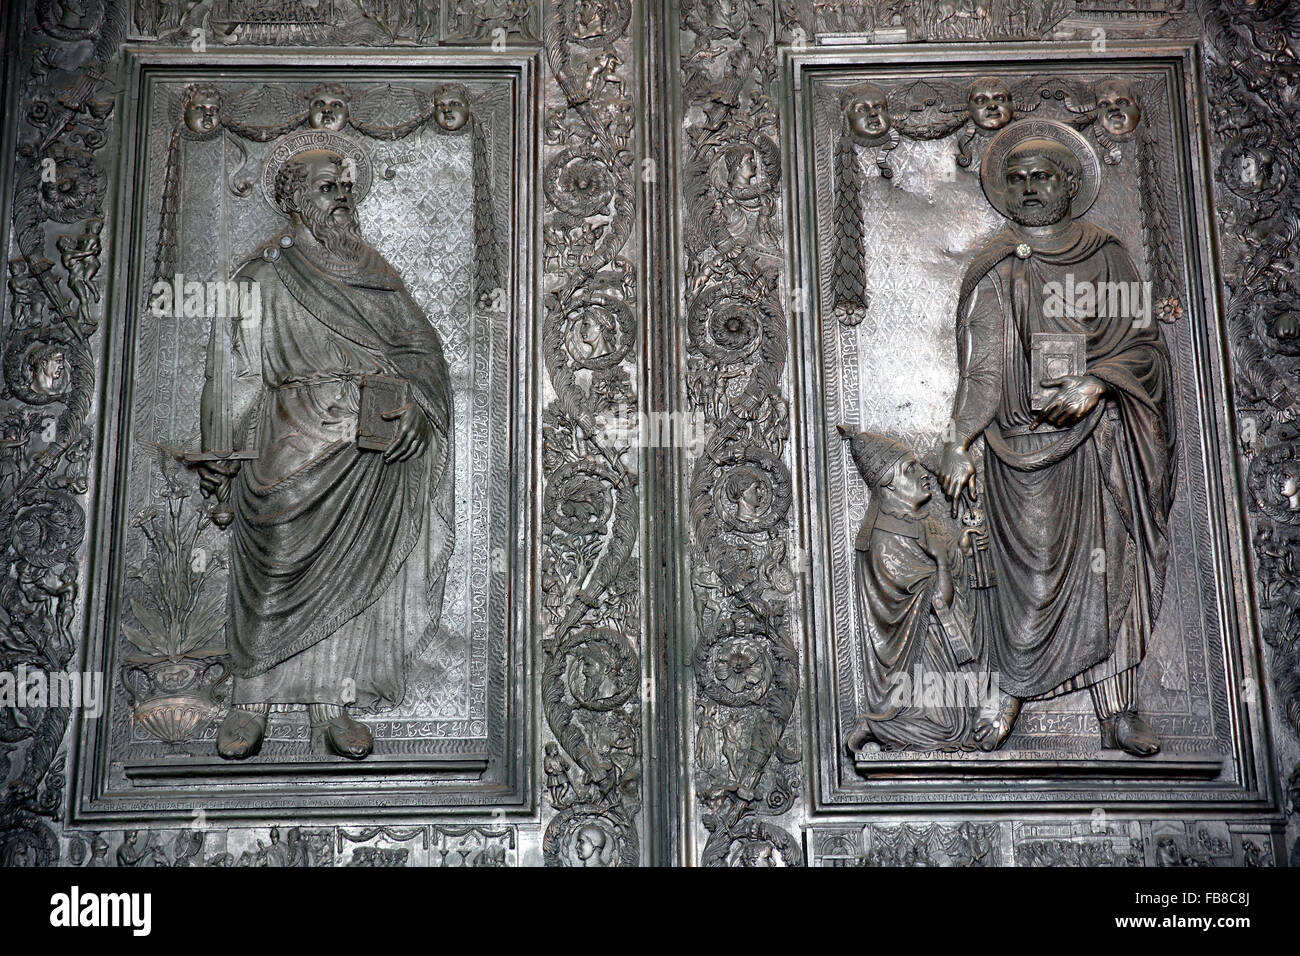 The Filarete Doors at Saint Peter's Cathedral in the Vatican. The bronze doors depict St Paul (left) and St Peter (right). Stock Photo